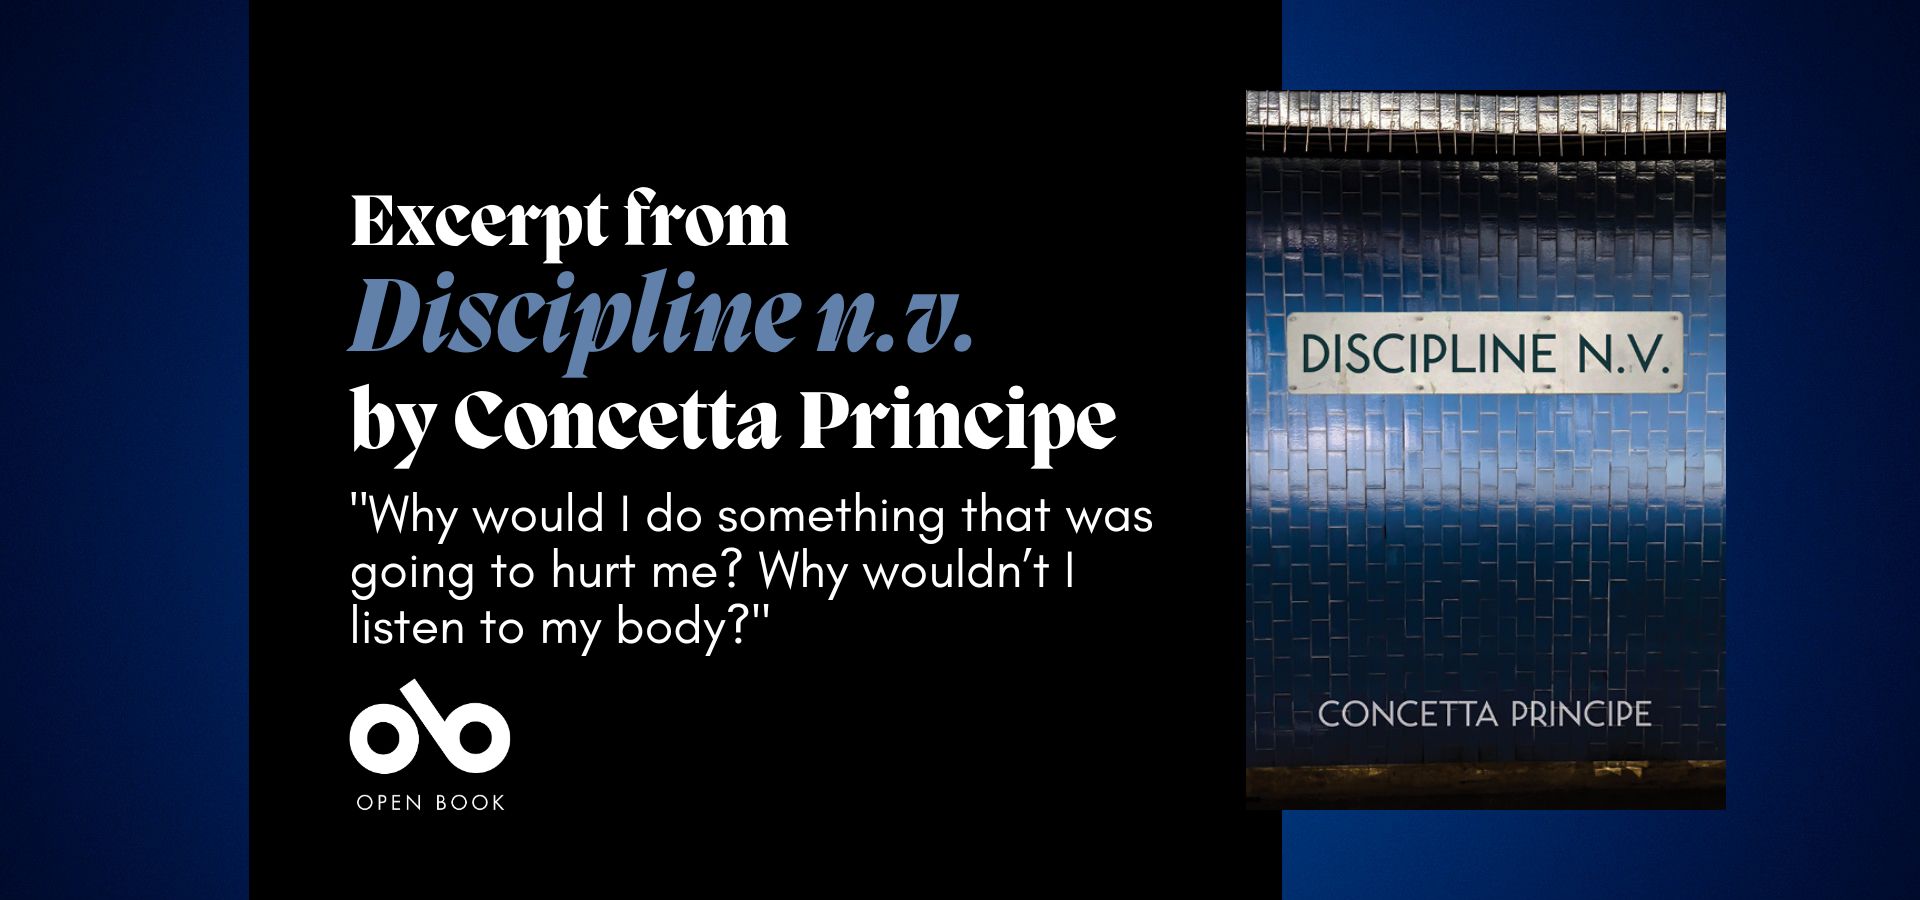 black and blue banner image with the cover of Discipline N.V. by Concetta Principe and text reading "Interview with Concetta Principe" and "Why would I do something that was going to hurt me? Why wouldn’t I listen to my body?"